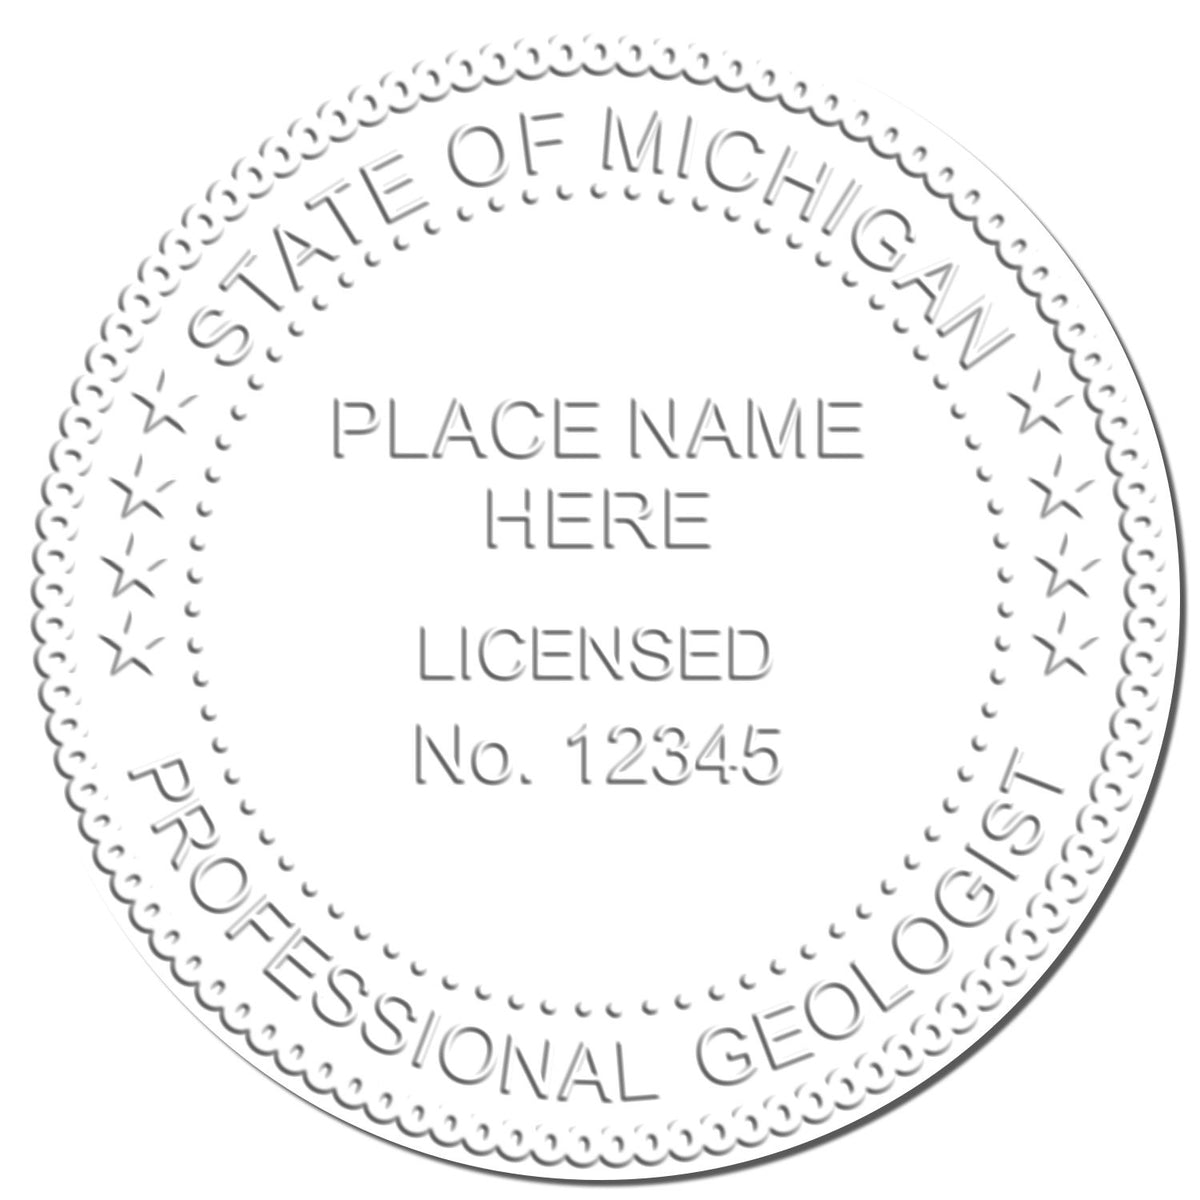 A photograph of the Hybrid Michigan Geologist Seal stamp impression reveals a vivid, professional image of the on paper.